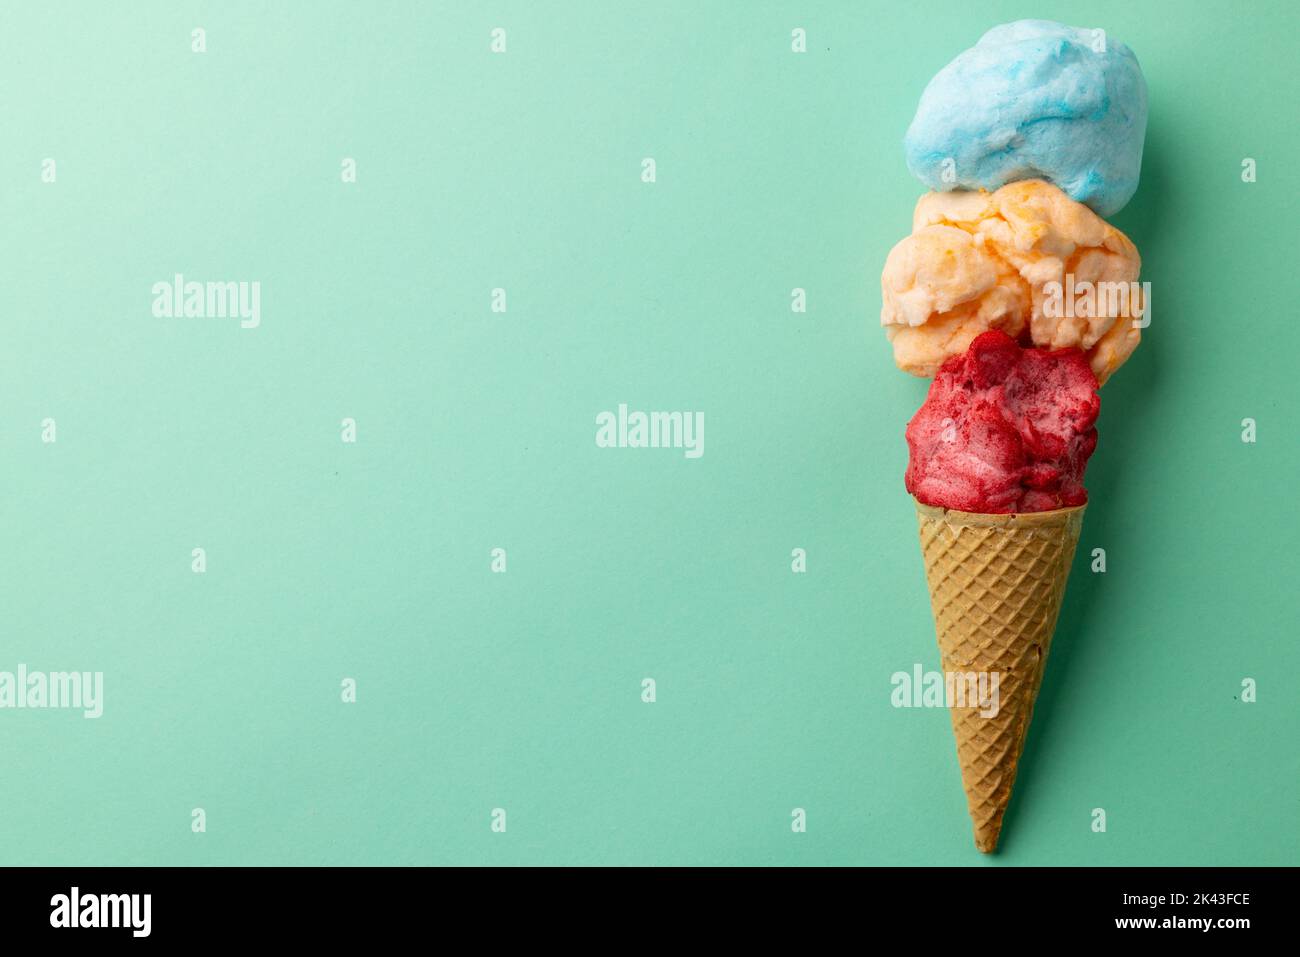 Horizontal image of three coloured flavours of ice cream in cone, on blue background with copy space Stock Photo